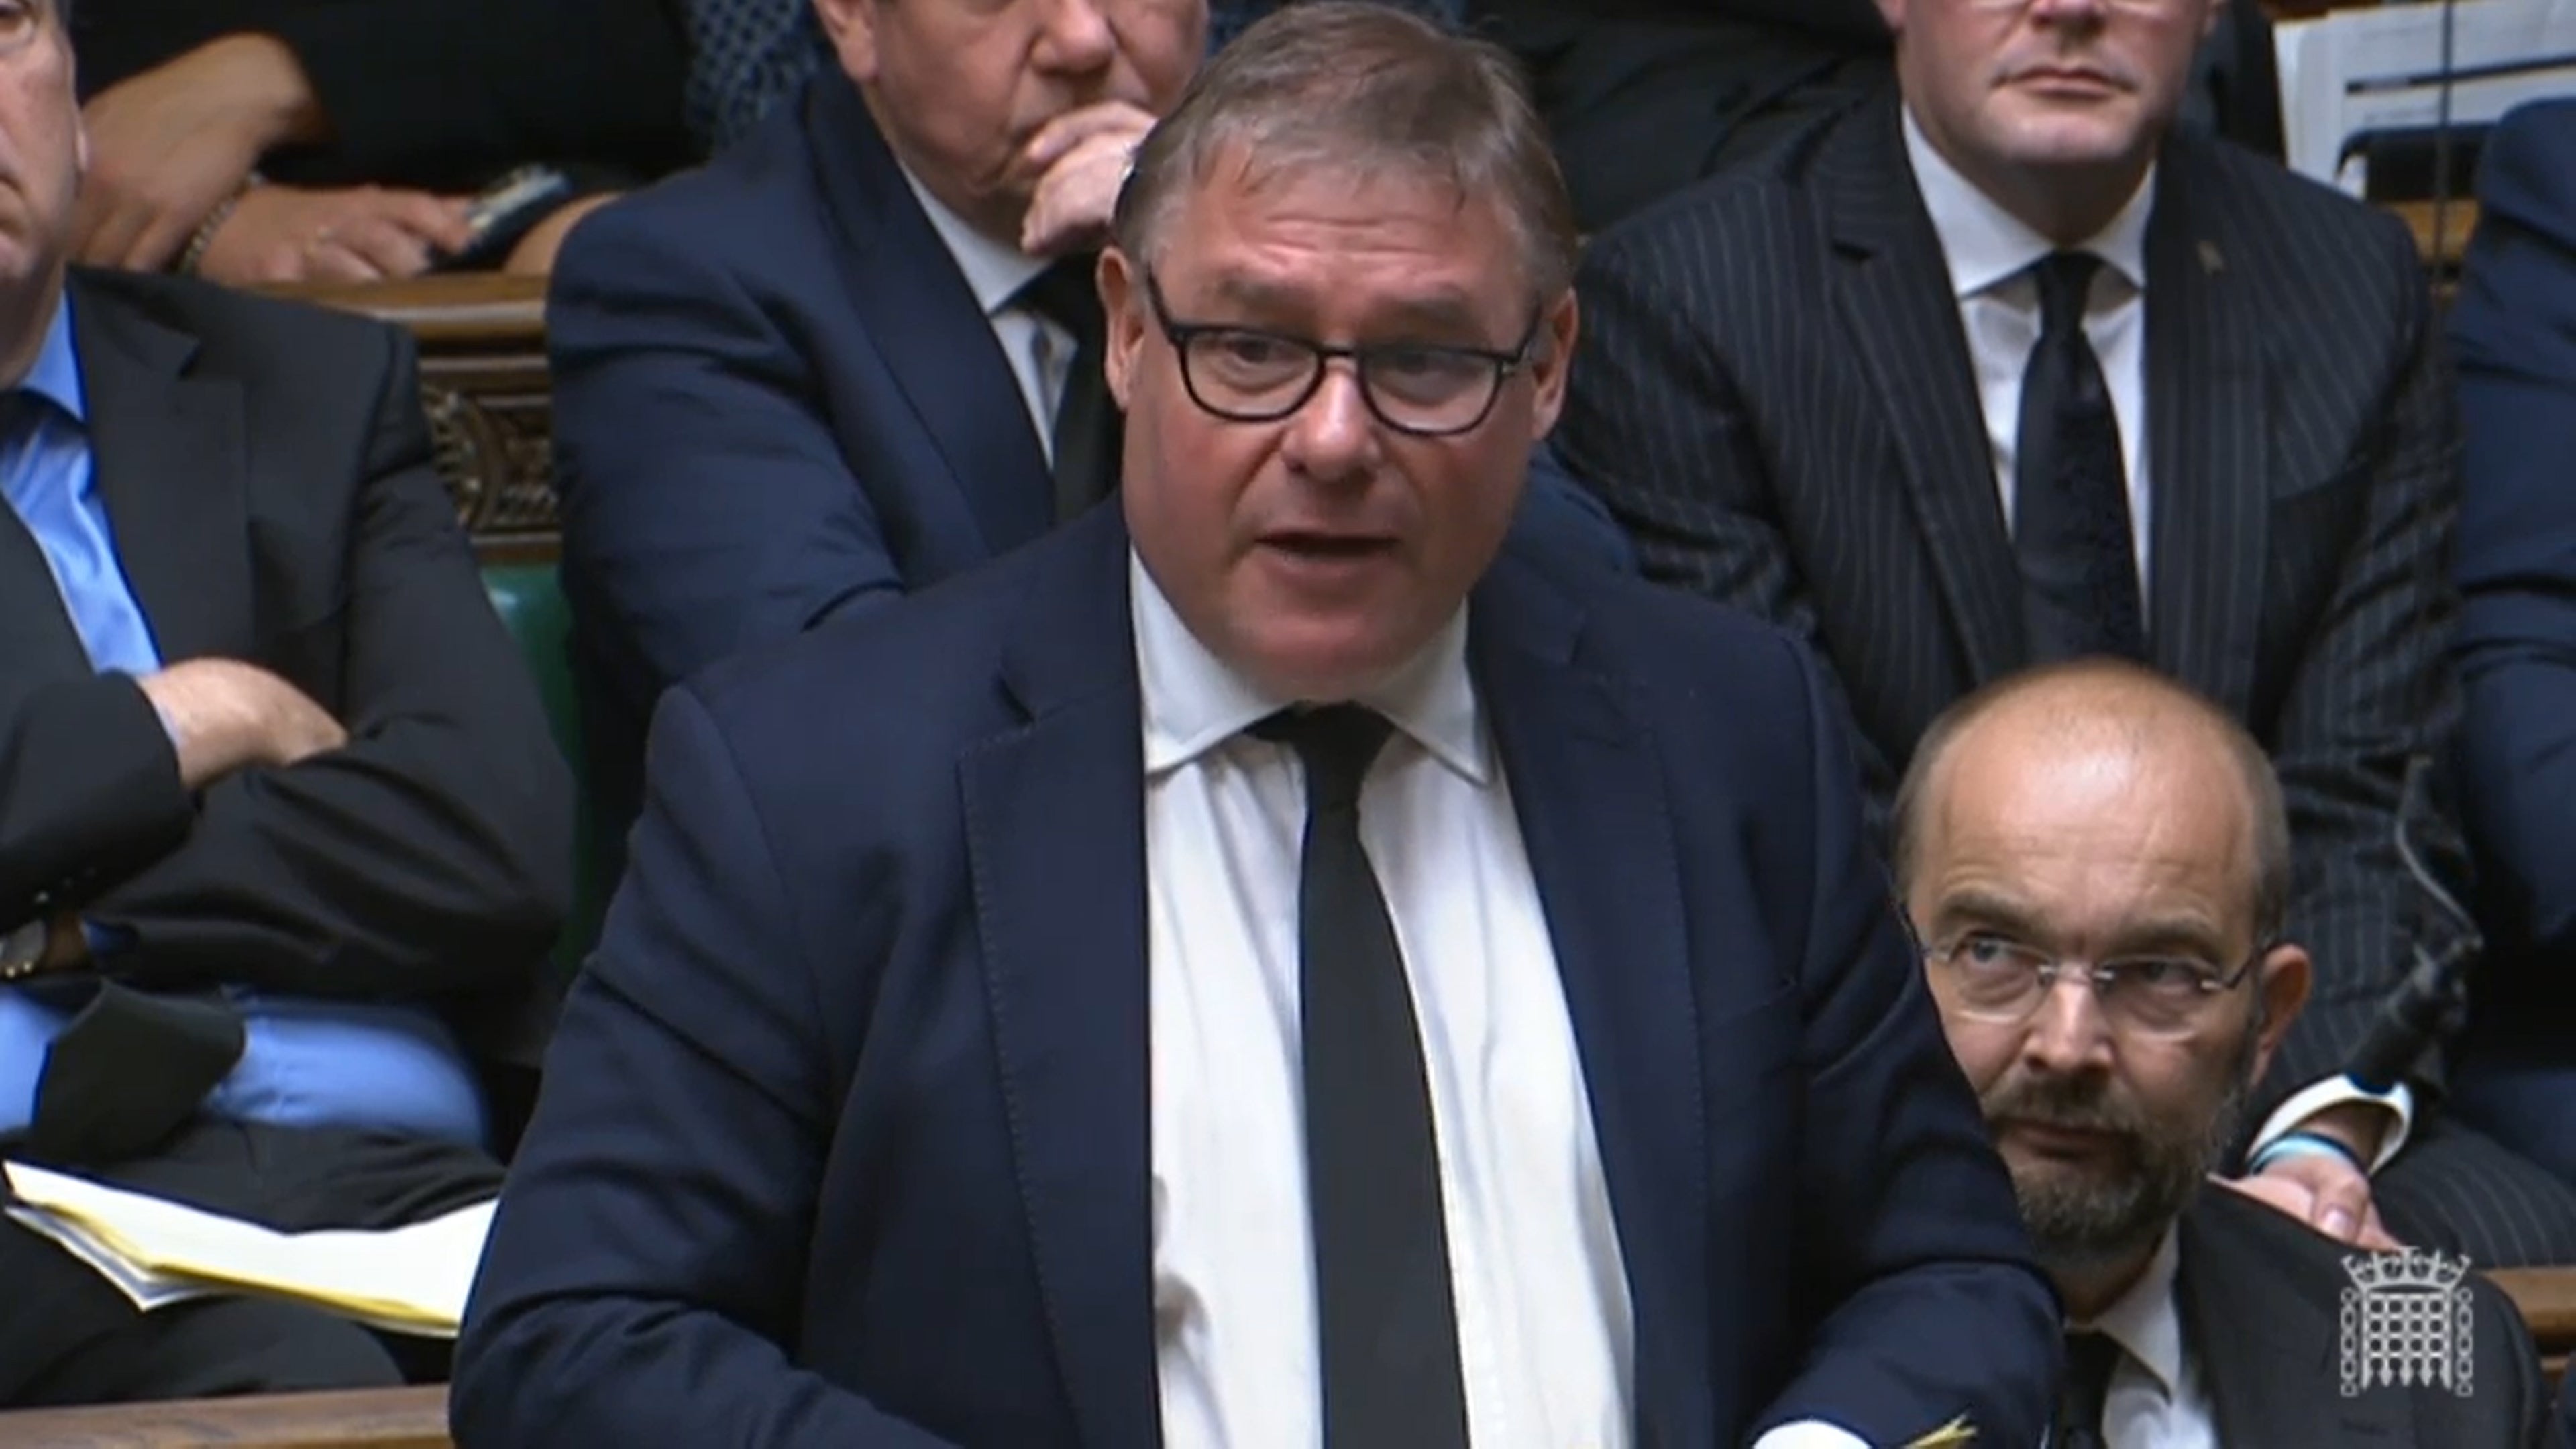 Rebel leader who lost his cause: Mark Francois